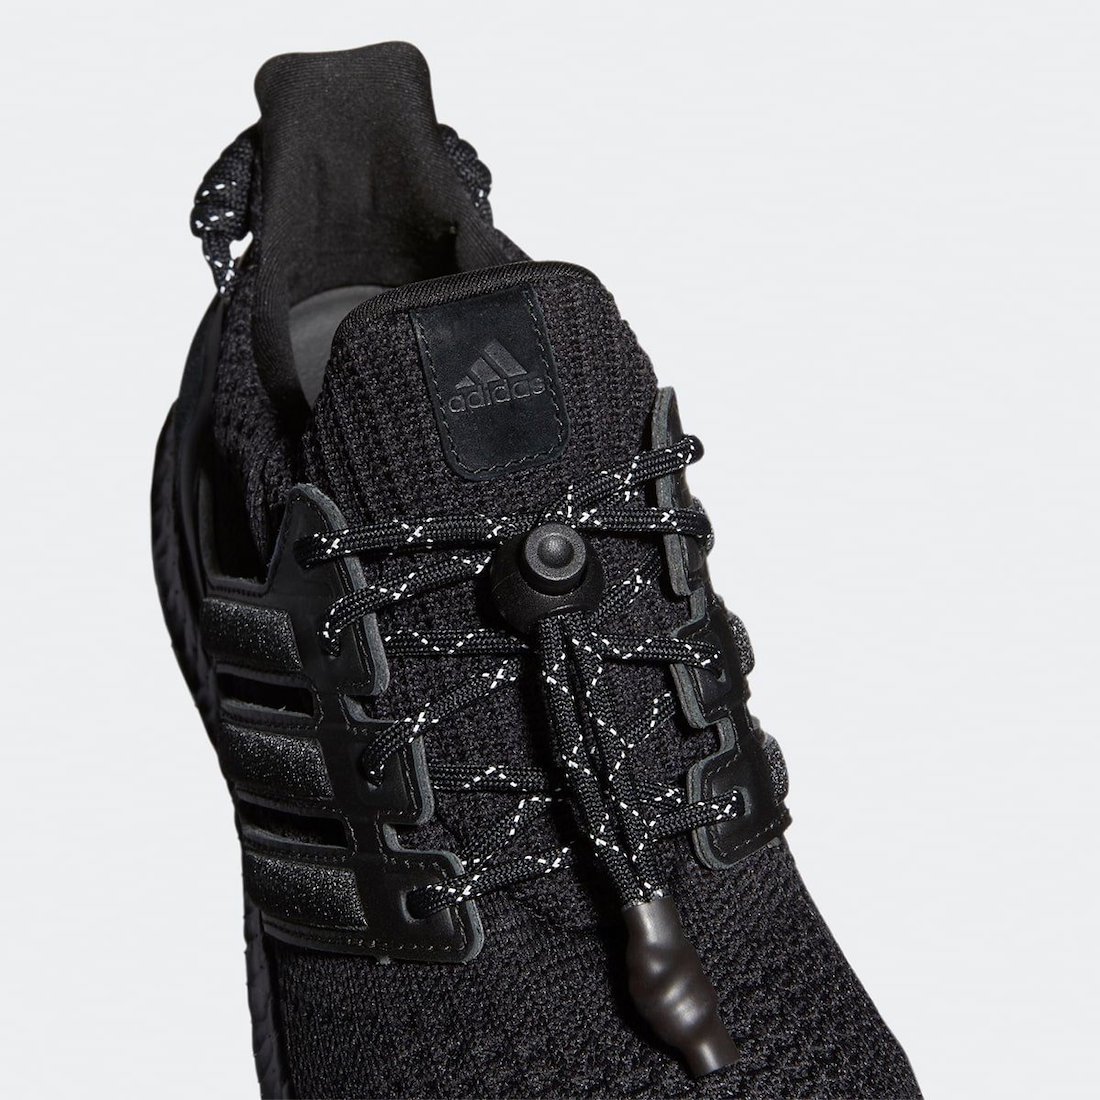 Beyonce Ivy Park adidas Ultra Boost Black GX0200 Release Date